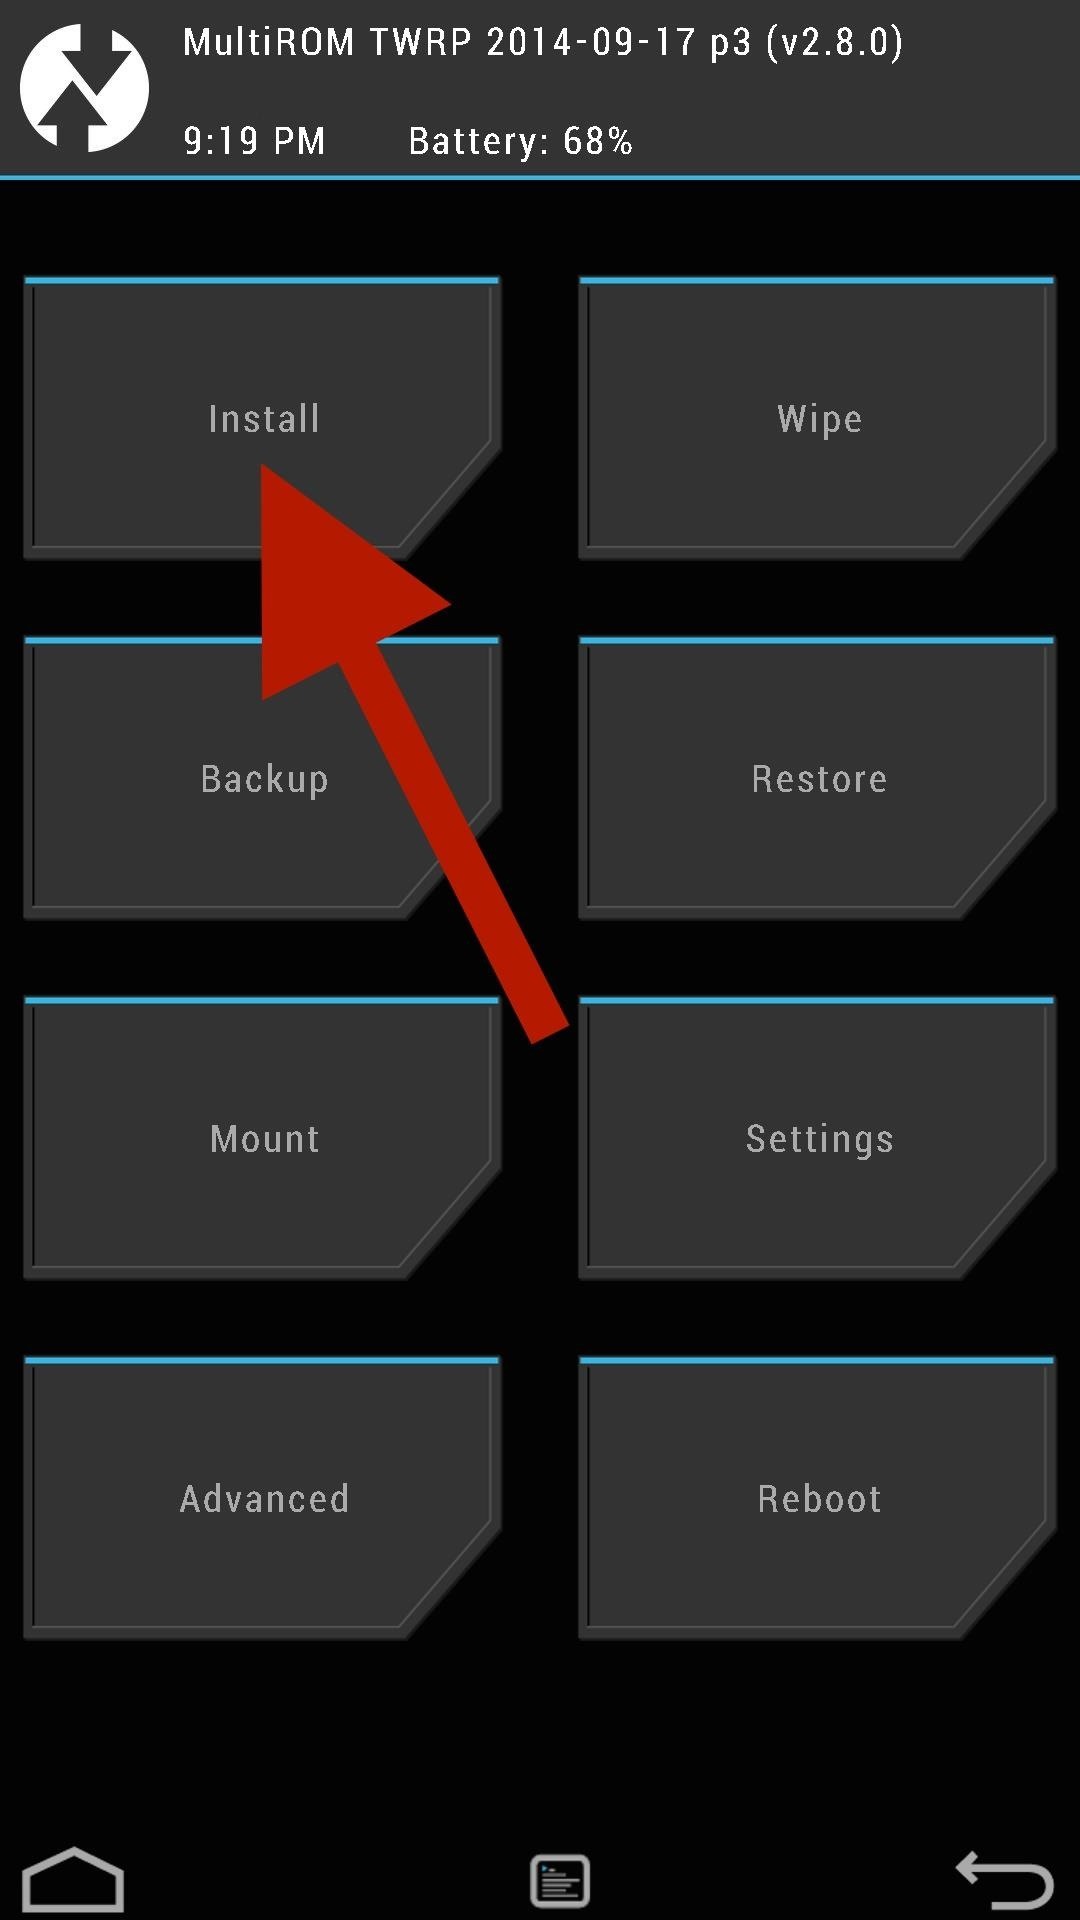 Change The Color Of Your Oneplus One S Lock Screen - Twrp Recovery -  1080x1920 Wallpaper - teahub.io